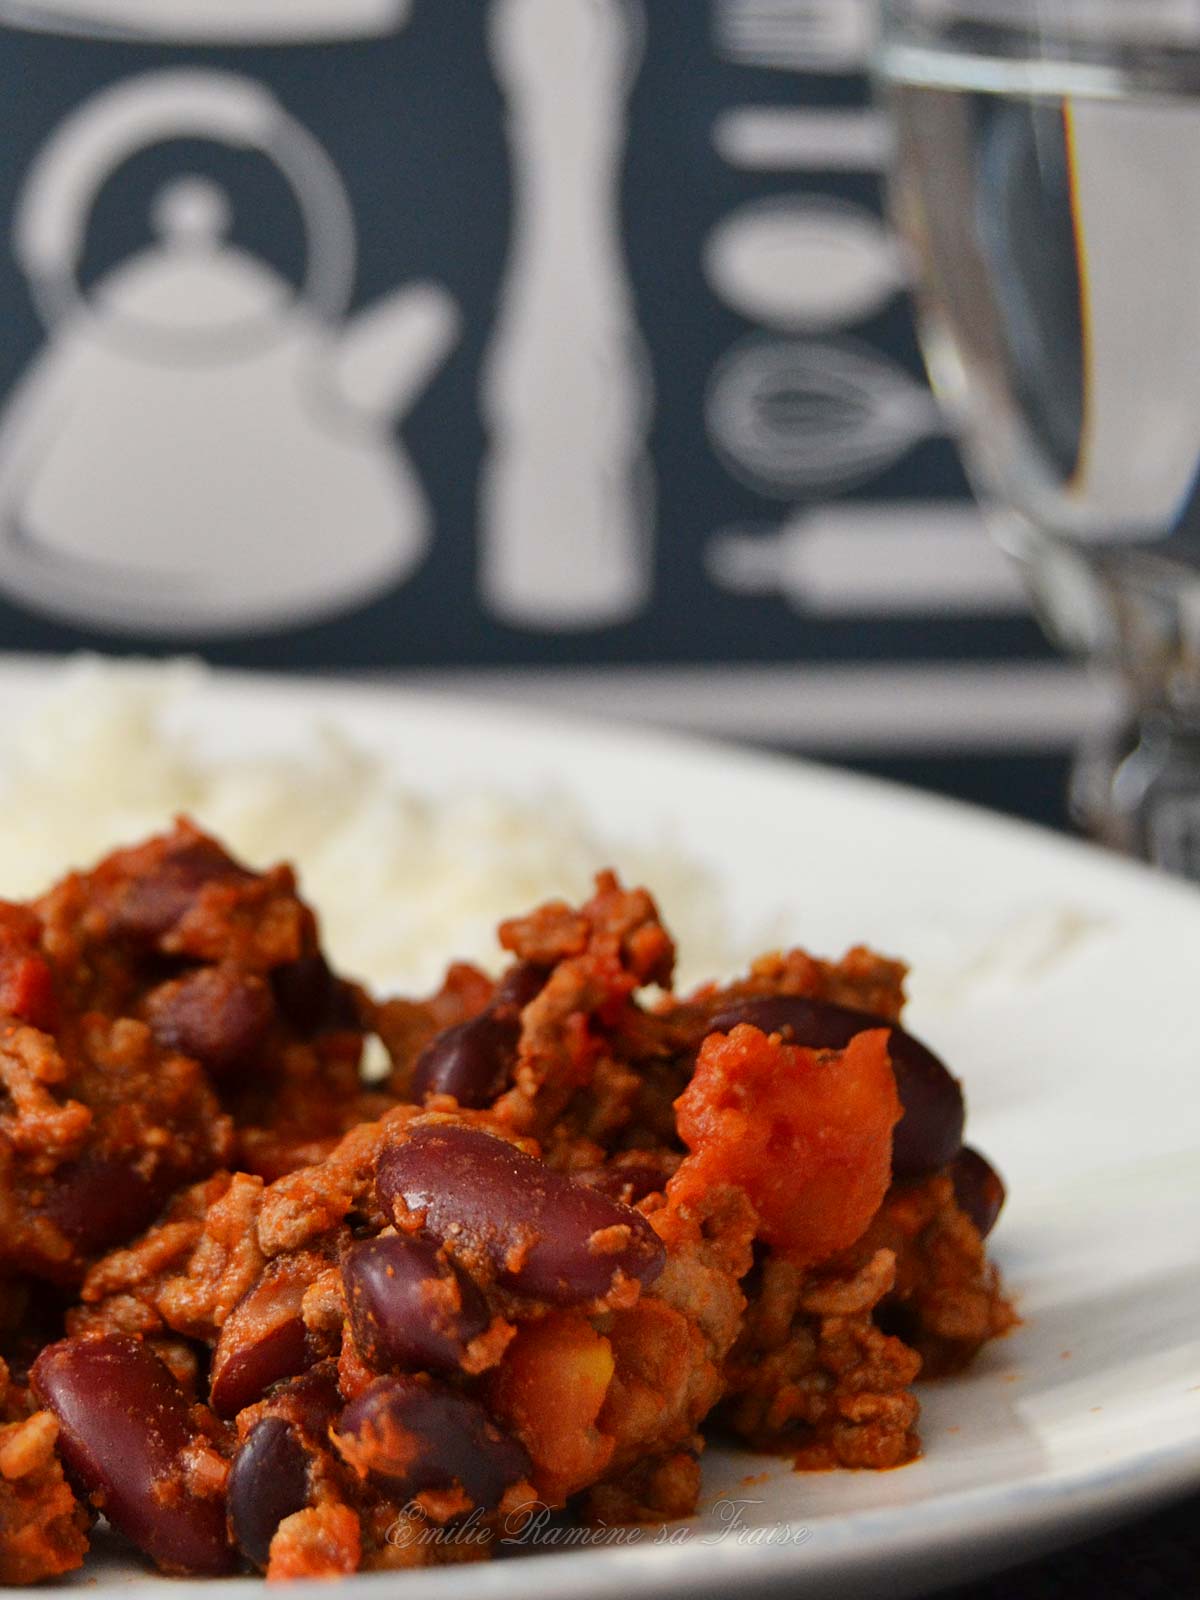 Chili con carne léger